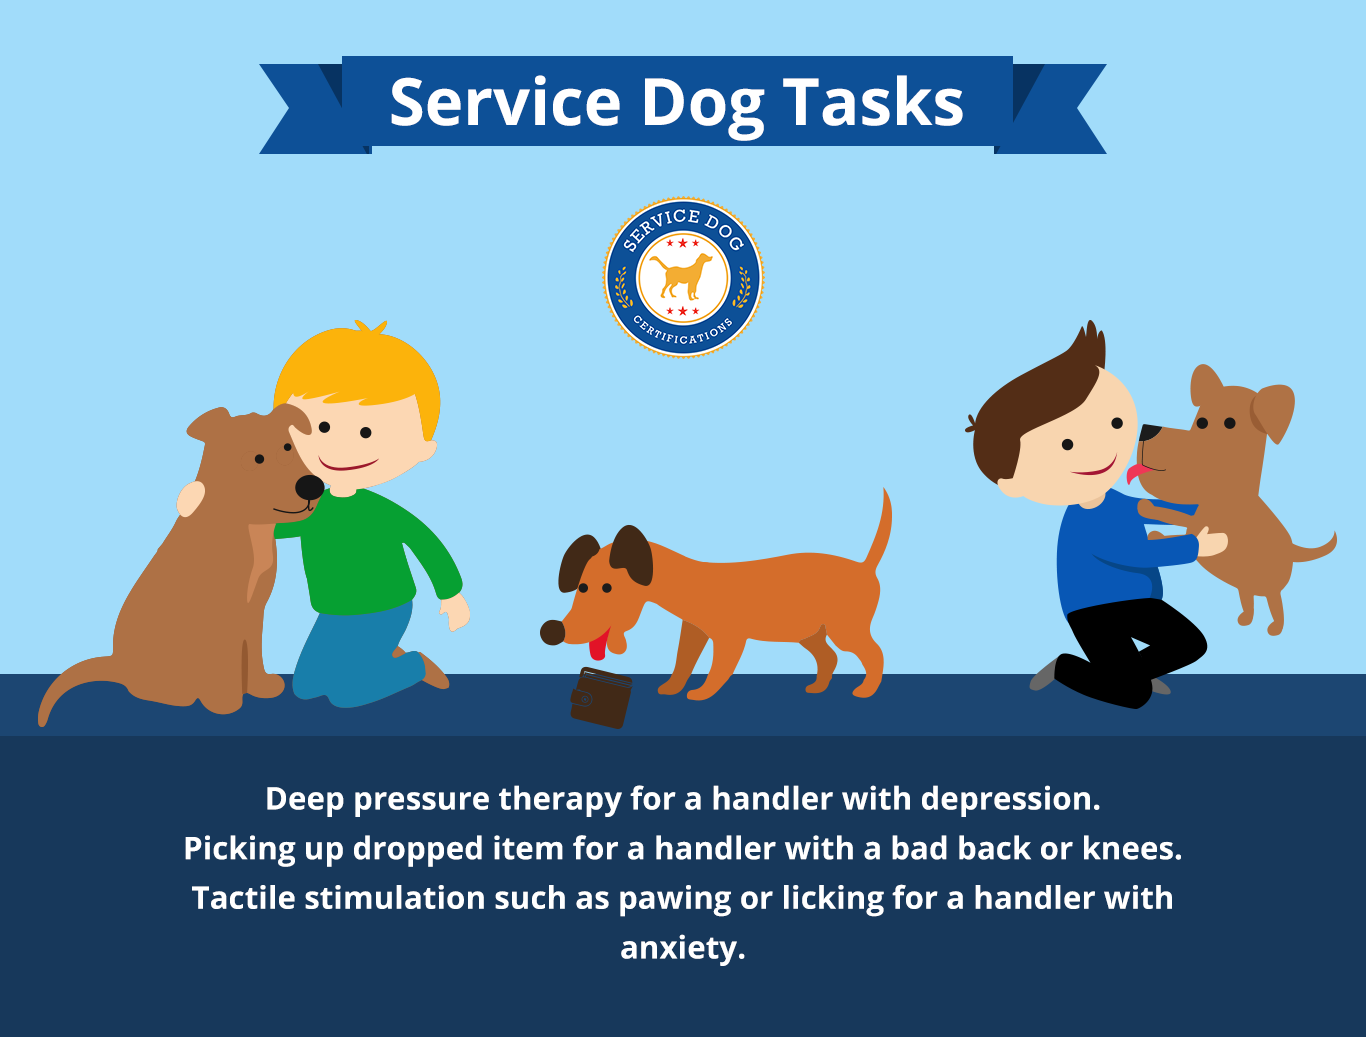 What Services do Service Dogs Provide? - Service Dog Certifications